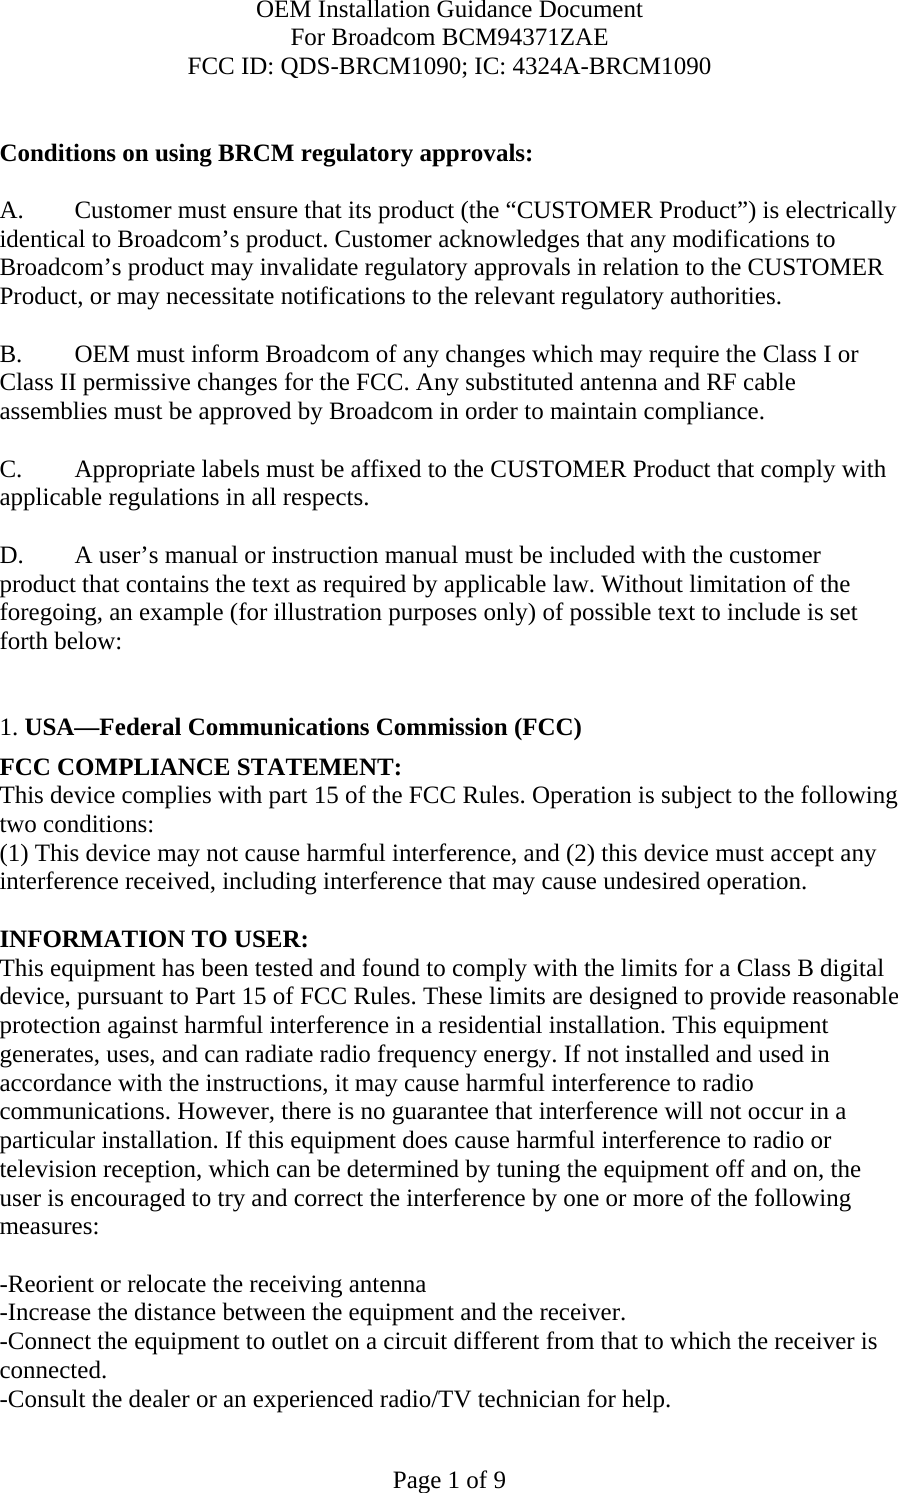 OEM Installation Guidance Document For Broadcom BCM94371ZAE FCC ID: QDS-BRCM1090; IC: 4324A-BRCM1090  Page 1 of 9  Conditions on using BRCM regulatory approvals:   A.  Customer must ensure that its product (the “CUSTOMER Product”) is electrically identical to Broadcom’s product. Customer acknowledges that any modifications to Broadcom’s product may invalidate regulatory approvals in relation to the CUSTOMER Product, or may necessitate notifications to the relevant regulatory authorities.   B.   OEM must inform Broadcom of any changes which may require the Class I or Class II permissive changes for the FCC. Any substituted antenna and RF cable assemblies must be approved by Broadcom in order to maintain compliance.  C.  Appropriate labels must be affixed to the CUSTOMER Product that comply with  applicable regulations in all respects.    D.   A user’s manual or instruction manual must be included with the customer product that contains the text as required by applicable law. Without limitation of the foregoing, an example (for illustration purposes only) of possible text to include is set forth below:    1. USA—Federal Communications Commission (FCC) FCC COMPLIANCE STATEMENT: This device complies with part 15 of the FCC Rules. Operation is subject to the following two conditions: (1) This device may not cause harmful interference, and (2) this device must accept any interference received, including interference that may cause undesired operation.  INFORMATION TO USER: This equipment has been tested and found to comply with the limits for a Class B digital device, pursuant to Part 15 of FCC Rules. These limits are designed to provide reasonable protection against harmful interference in a residential installation. This equipment generates, uses, and can radiate radio frequency energy. If not installed and used in accordance with the instructions, it may cause harmful interference to radio communications. However, there is no guarantee that interference will not occur in a particular installation. If this equipment does cause harmful interference to radio or television reception, which can be determined by tuning the equipment off and on, the user is encouraged to try and correct the interference by one or more of the following measures:   -Reorient or relocate the receiving antenna -Increase the distance between the equipment and the receiver. -Connect the equipment to outlet on a circuit different from that to which the receiver is connected. -Consult the dealer or an experienced radio/TV technician for help. 